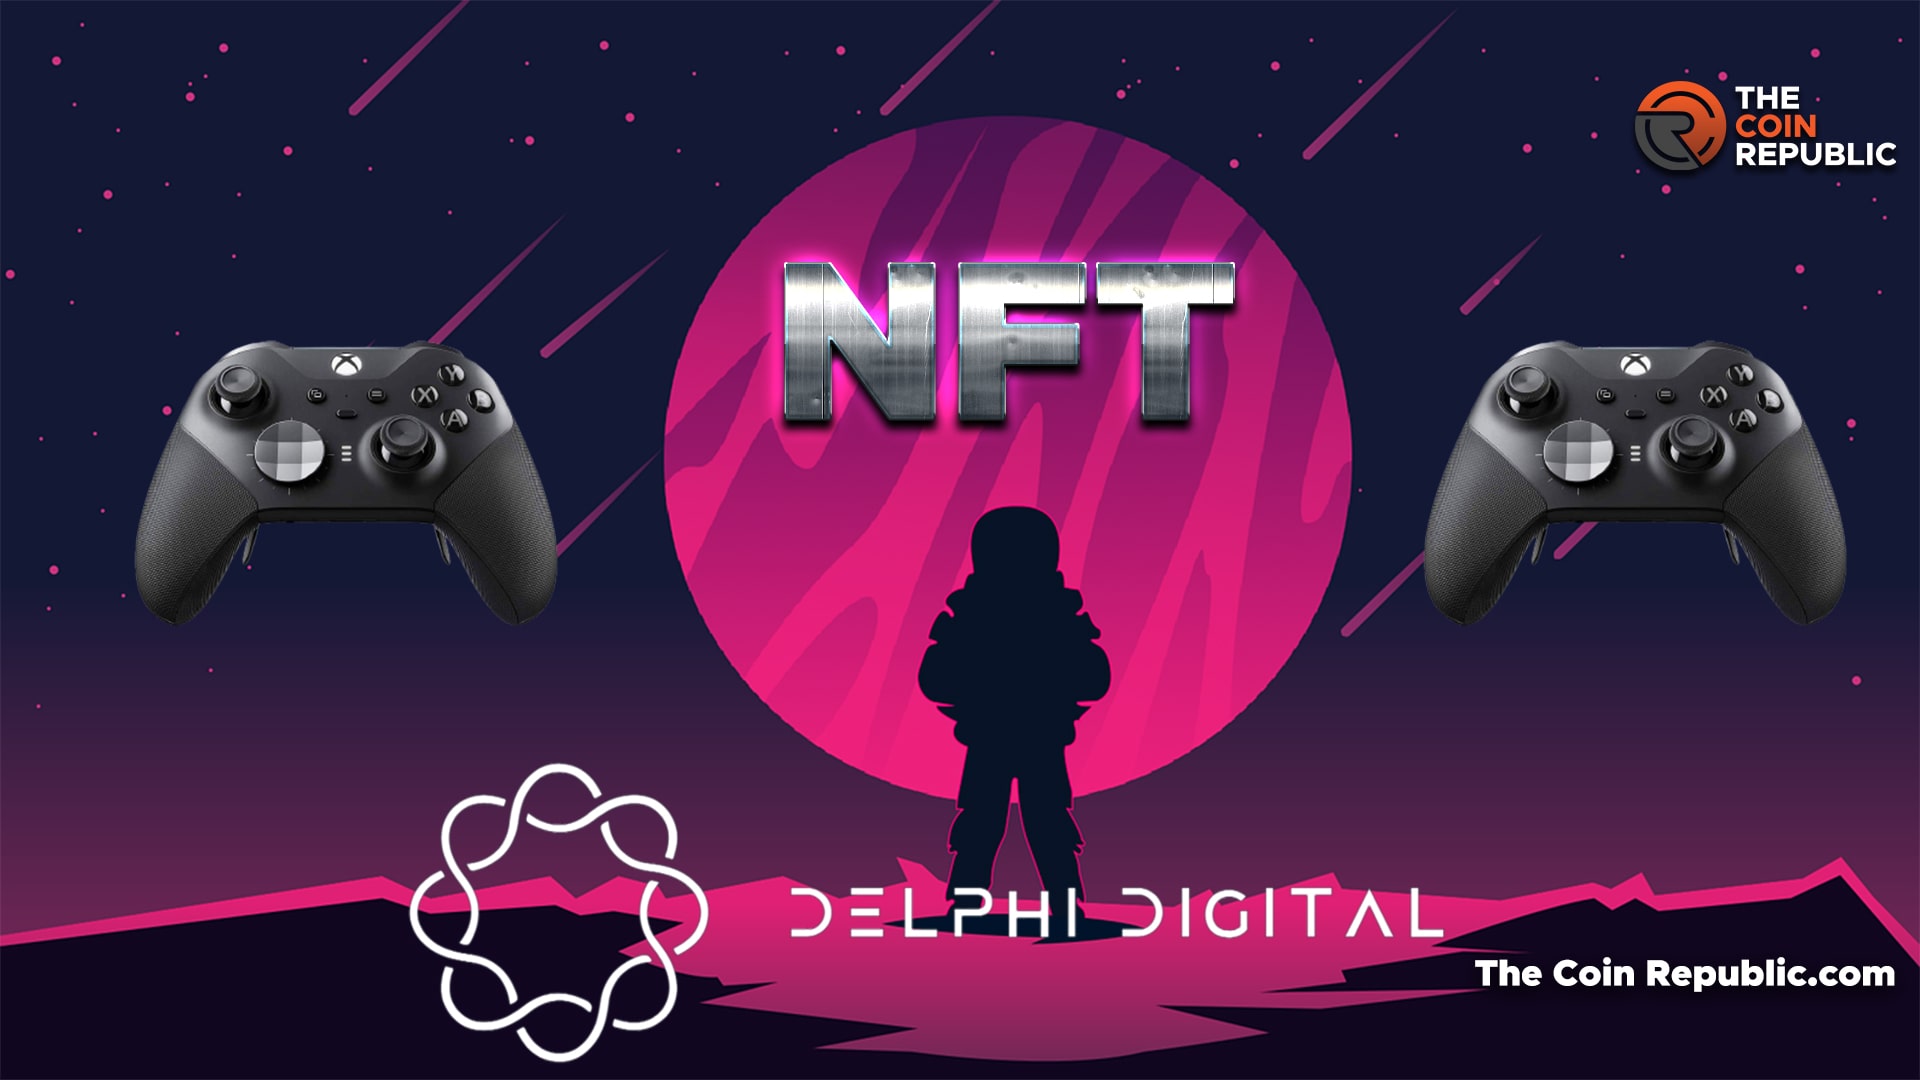 delphi-digital-introduced-ways-for-gamers-to-accept-nfts-and-nbsp